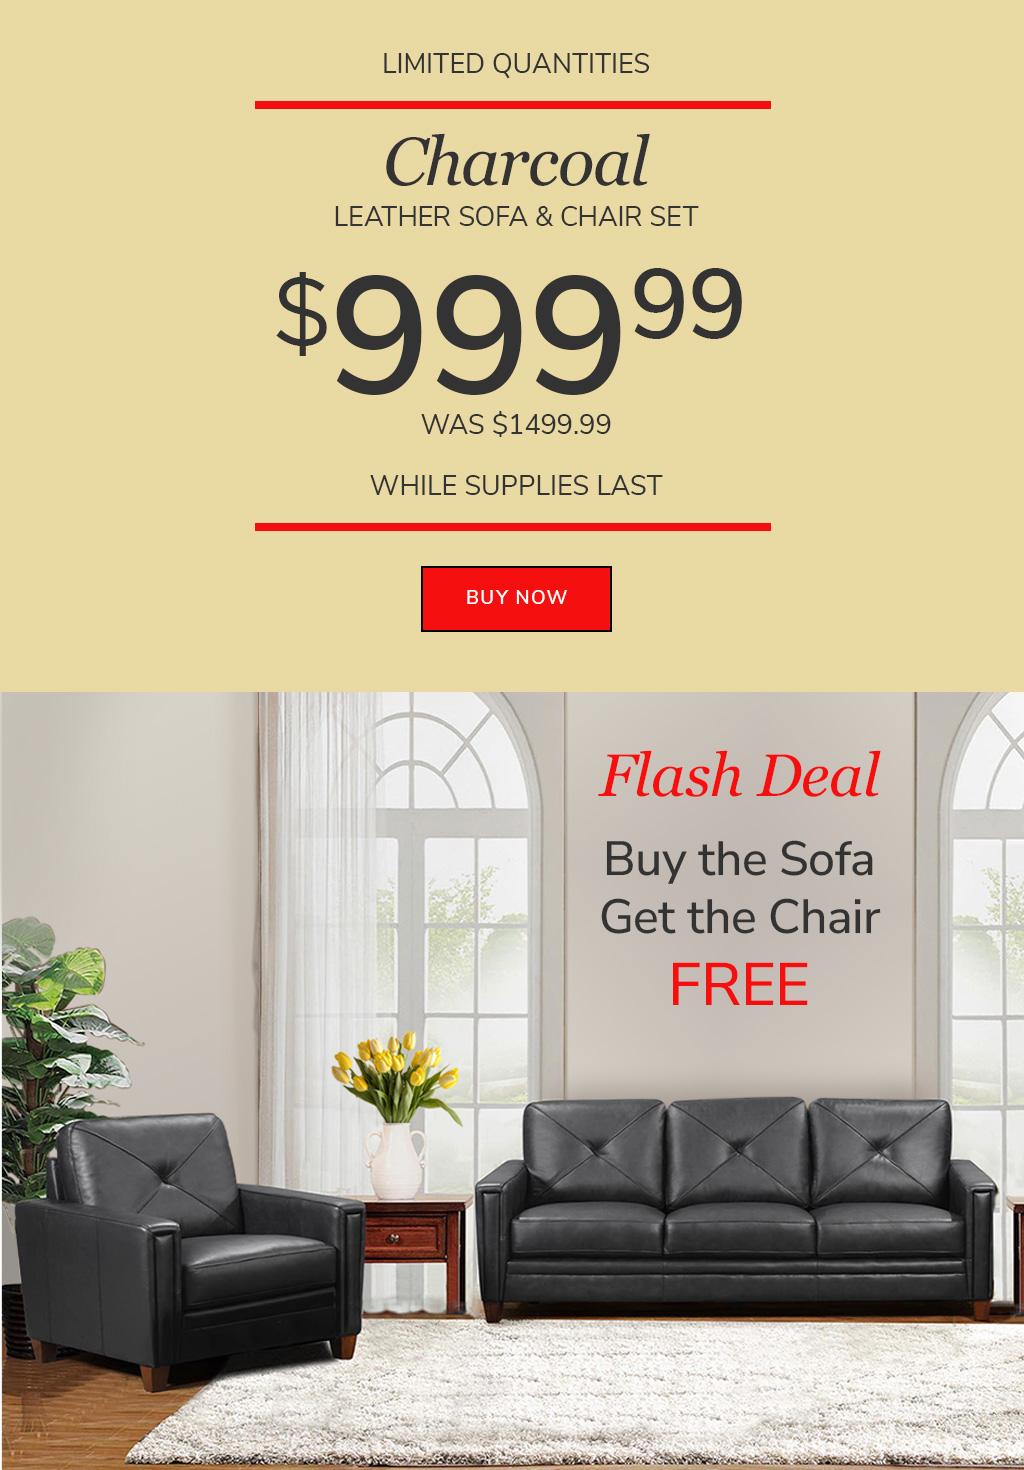 Flash Deal: Buy the Charcoal Leather Sofa Get the Chair FREE